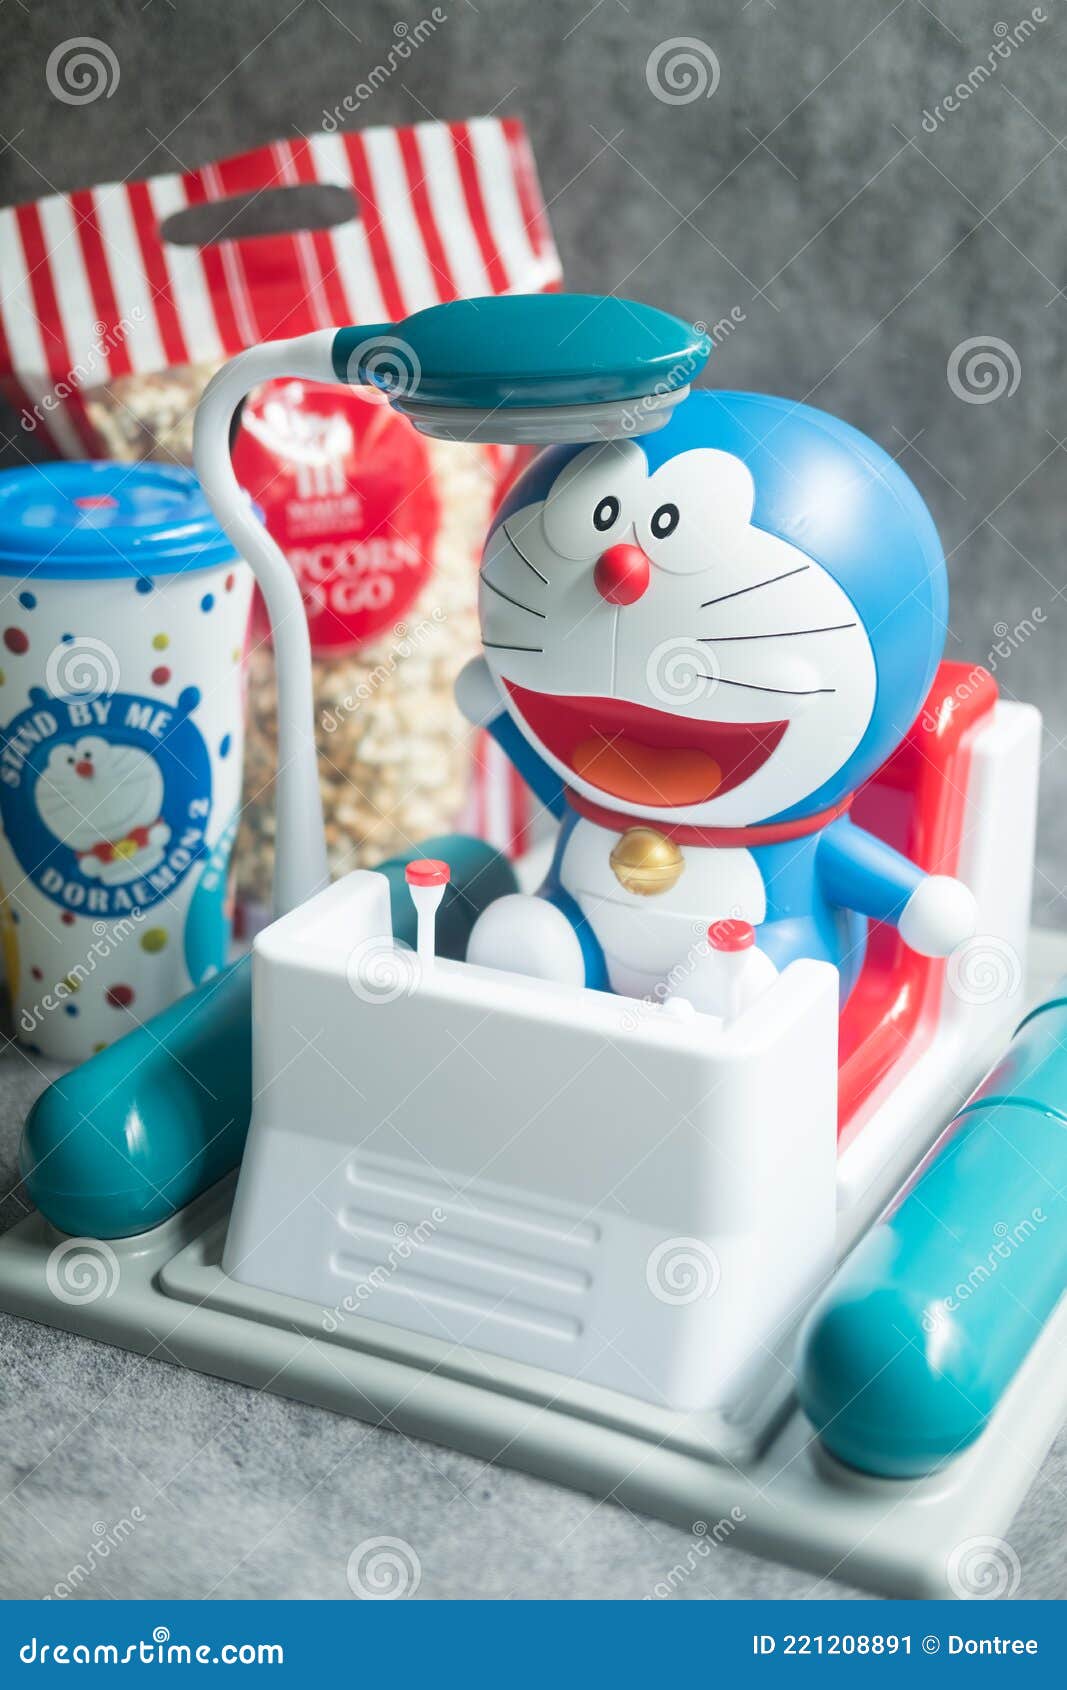 Bangkok Thailand June 14 Doraemon Time Machine Bucket Set To Promote The Movie Stand By Me Doraemon 2 From Major Editorial Photo Image Of Culture Child